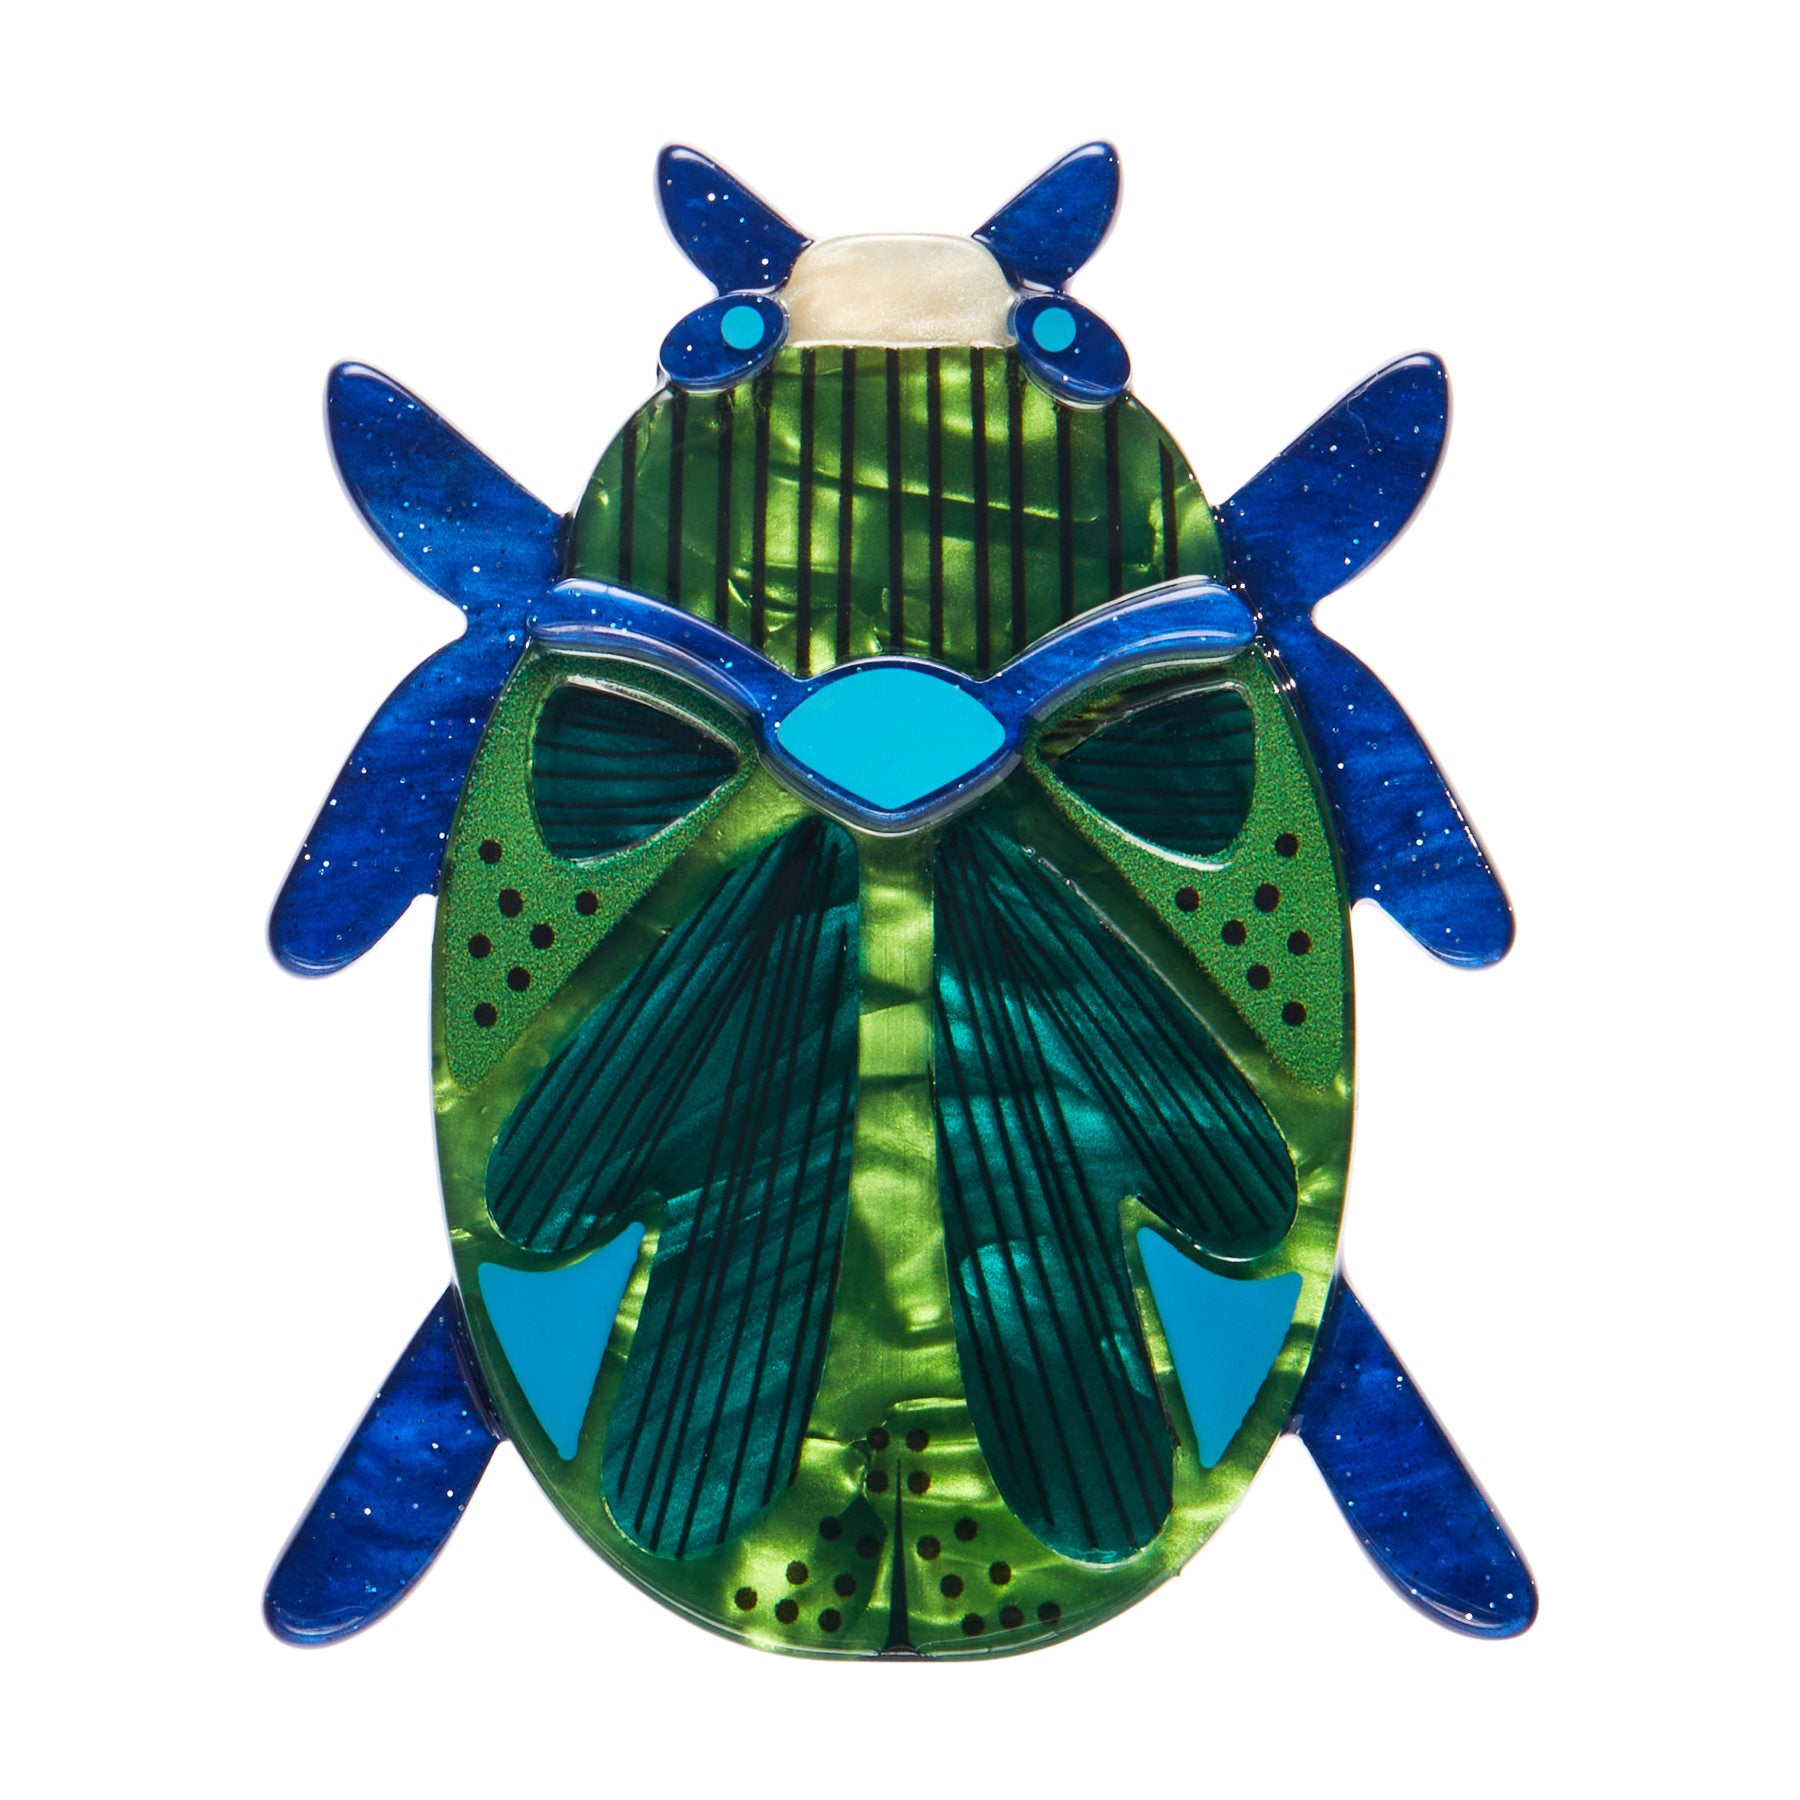 Jocelyn Proust Collaboration Collection "Luck of the Beetle" layered resin blue and green brooch